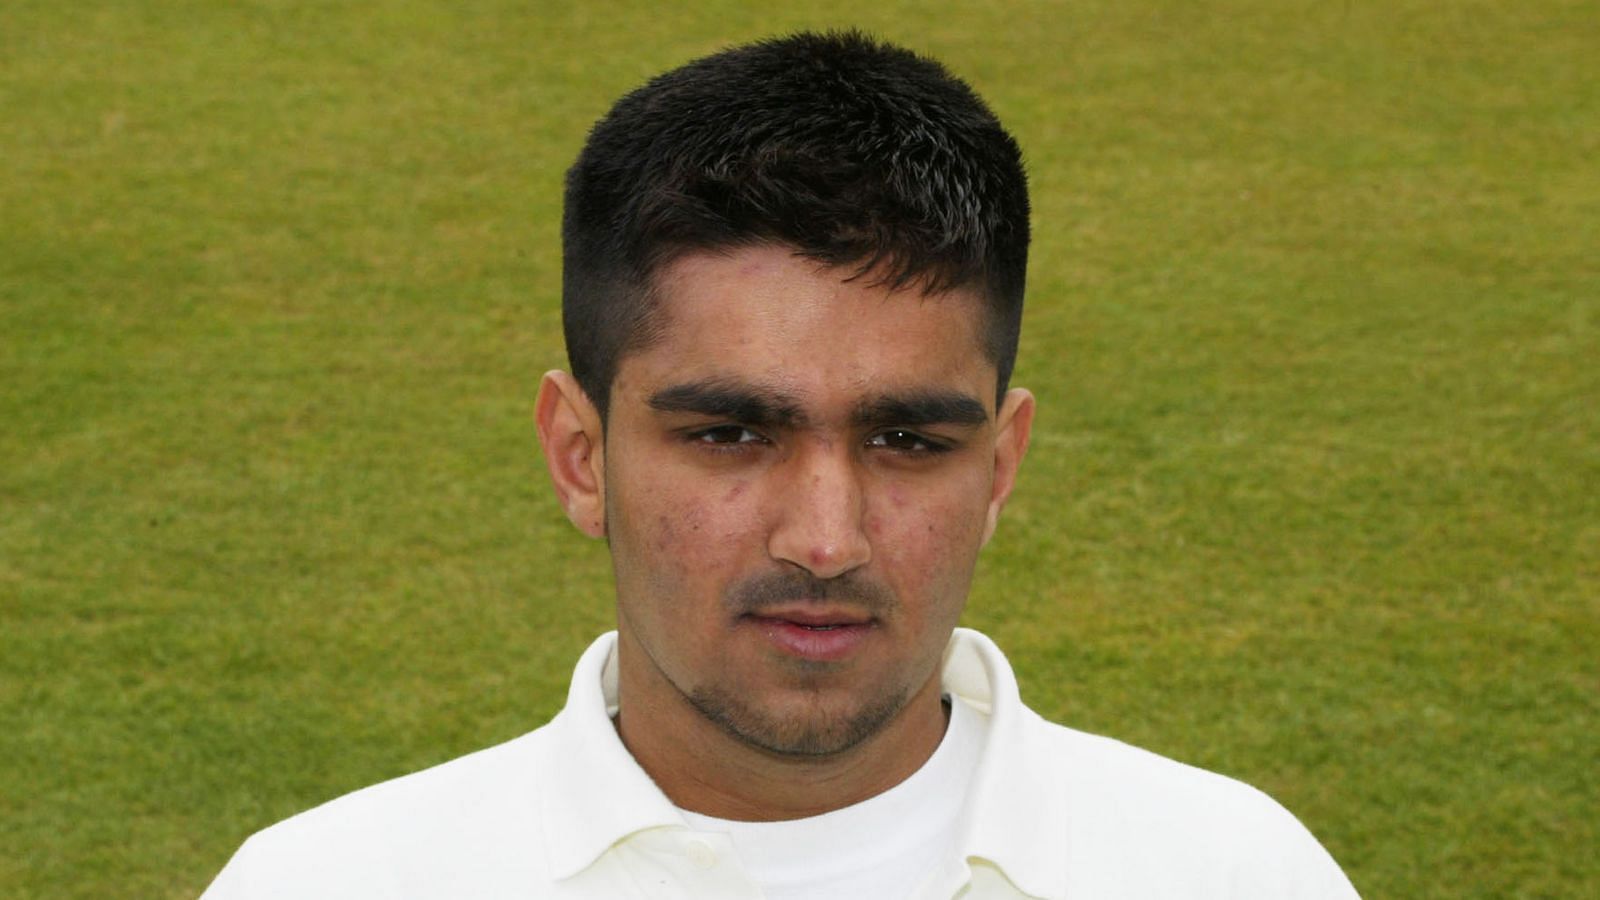 Zoheb Sharif in Essex colors in 2002 (PC: Sky News)